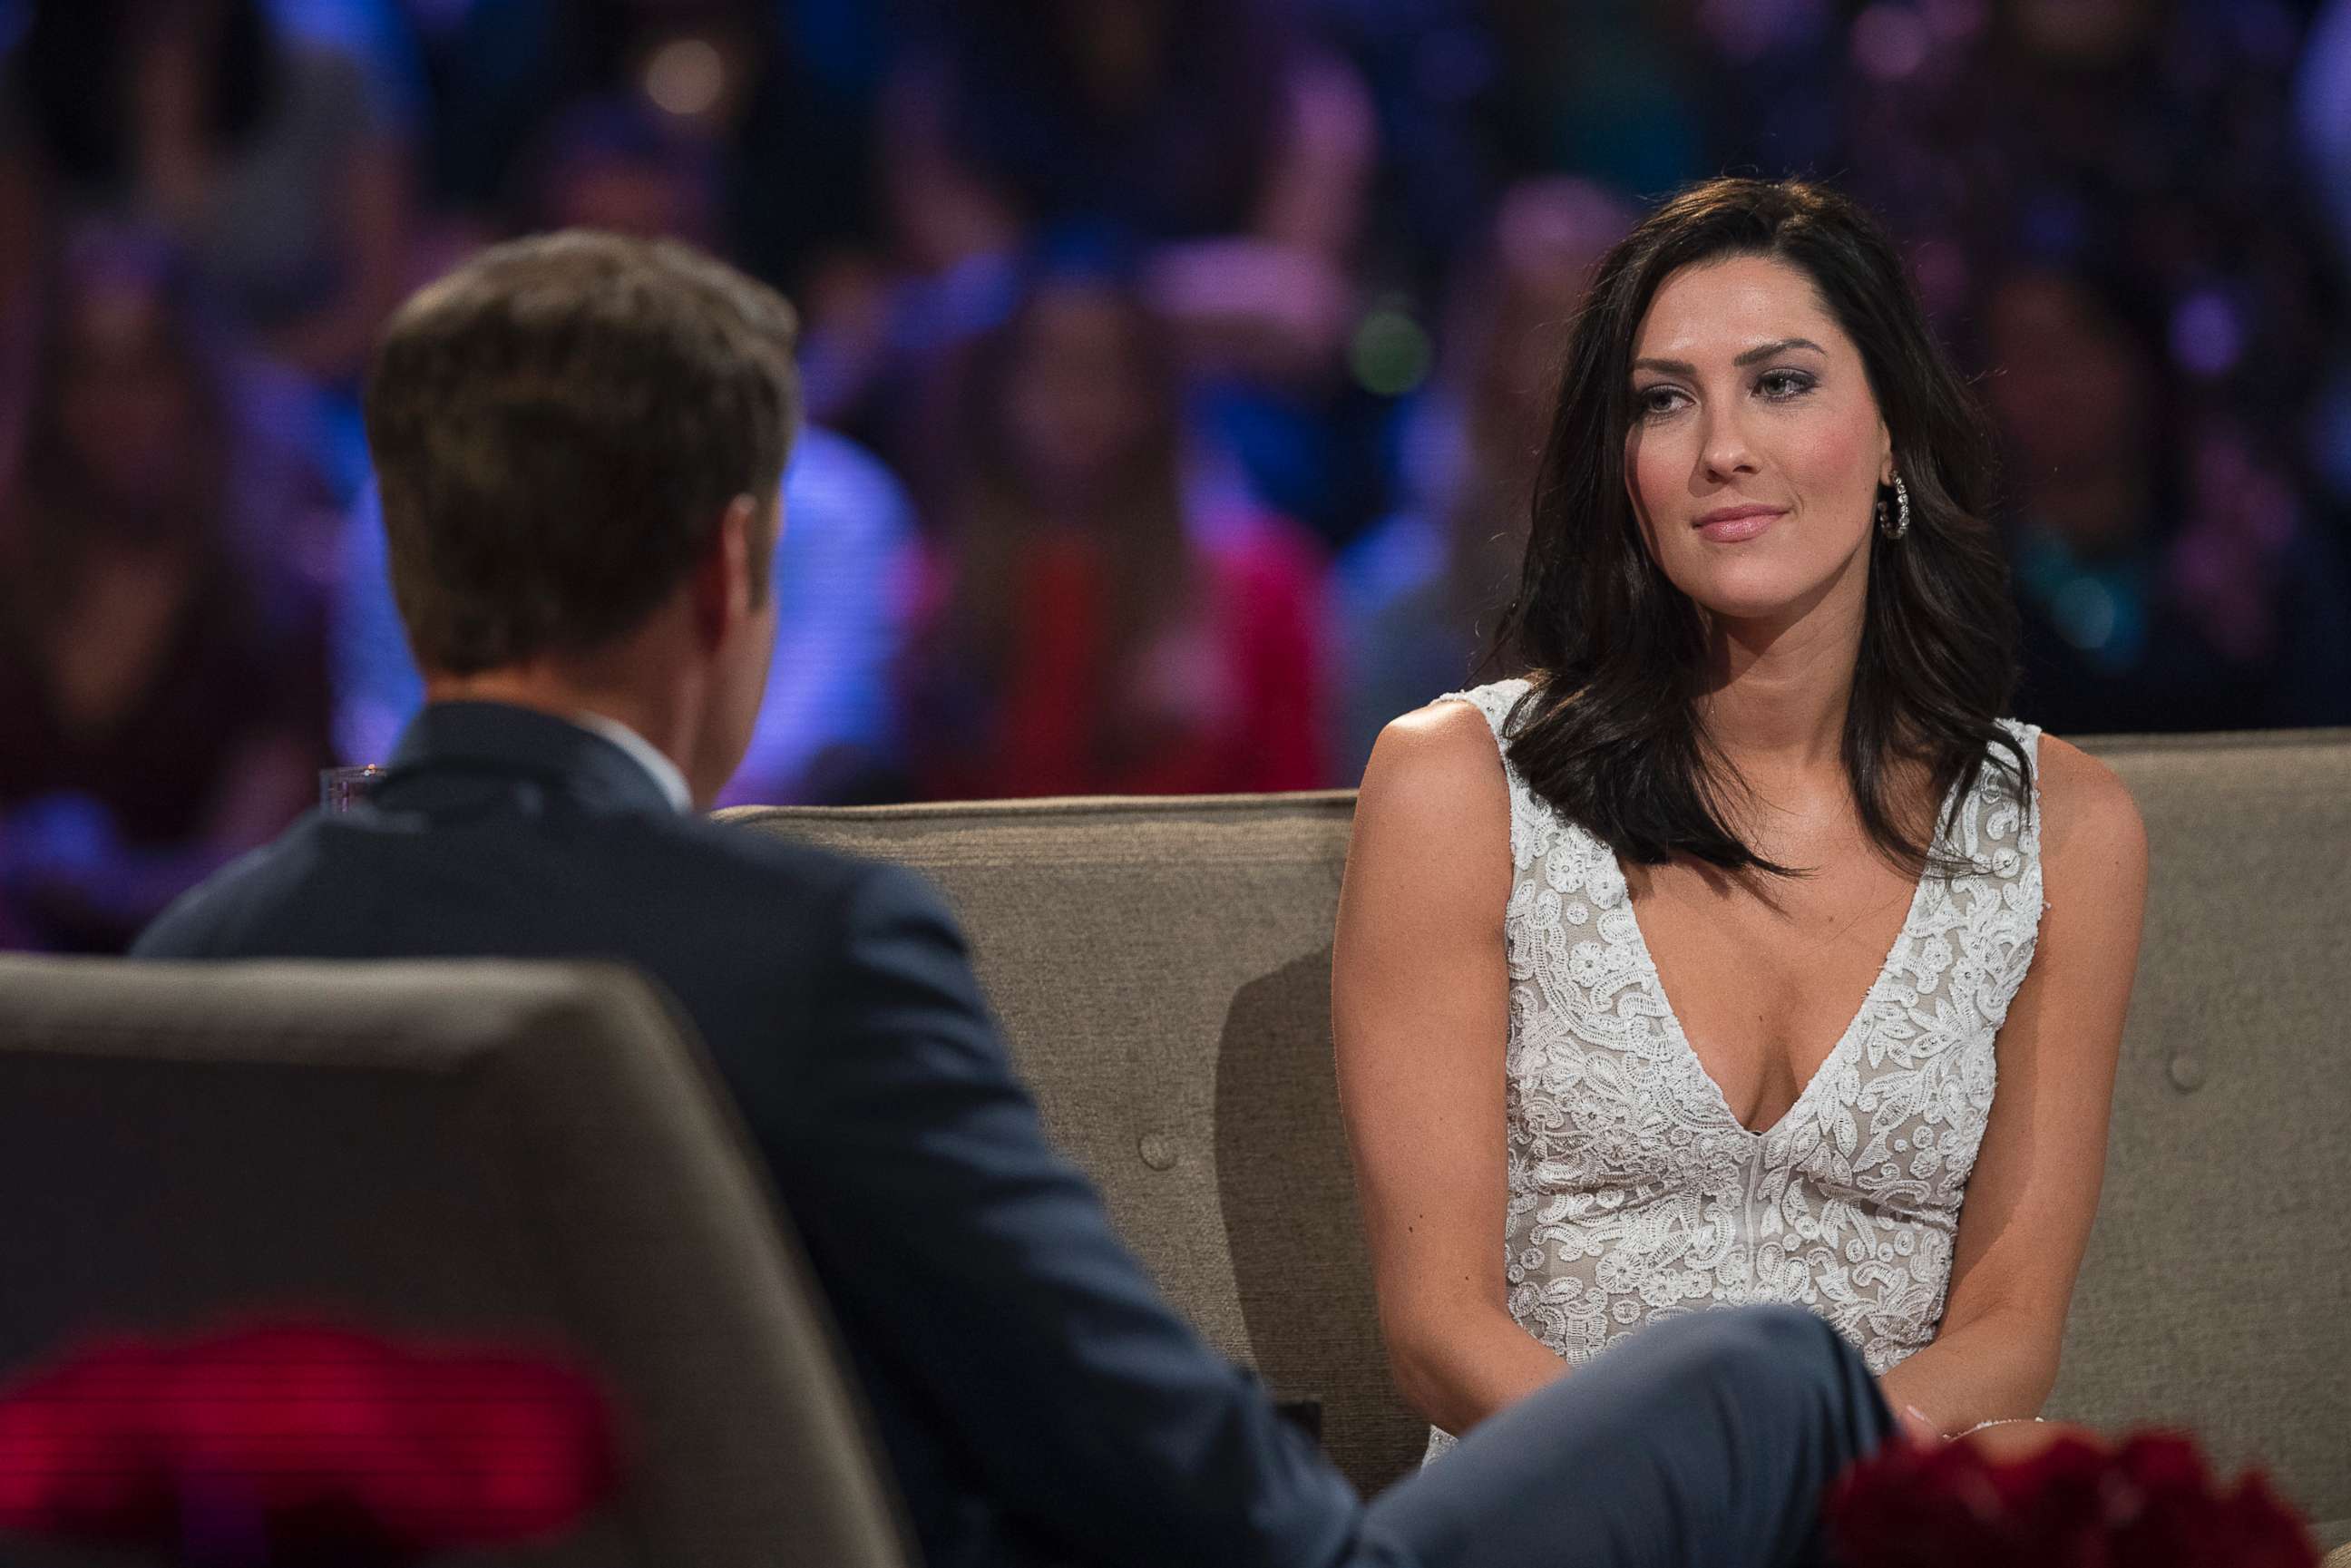 PHOTO:Becca K. on "The Bachelor: After the Final Rose," a two-hour live special, March 6, 2018 on ABC.